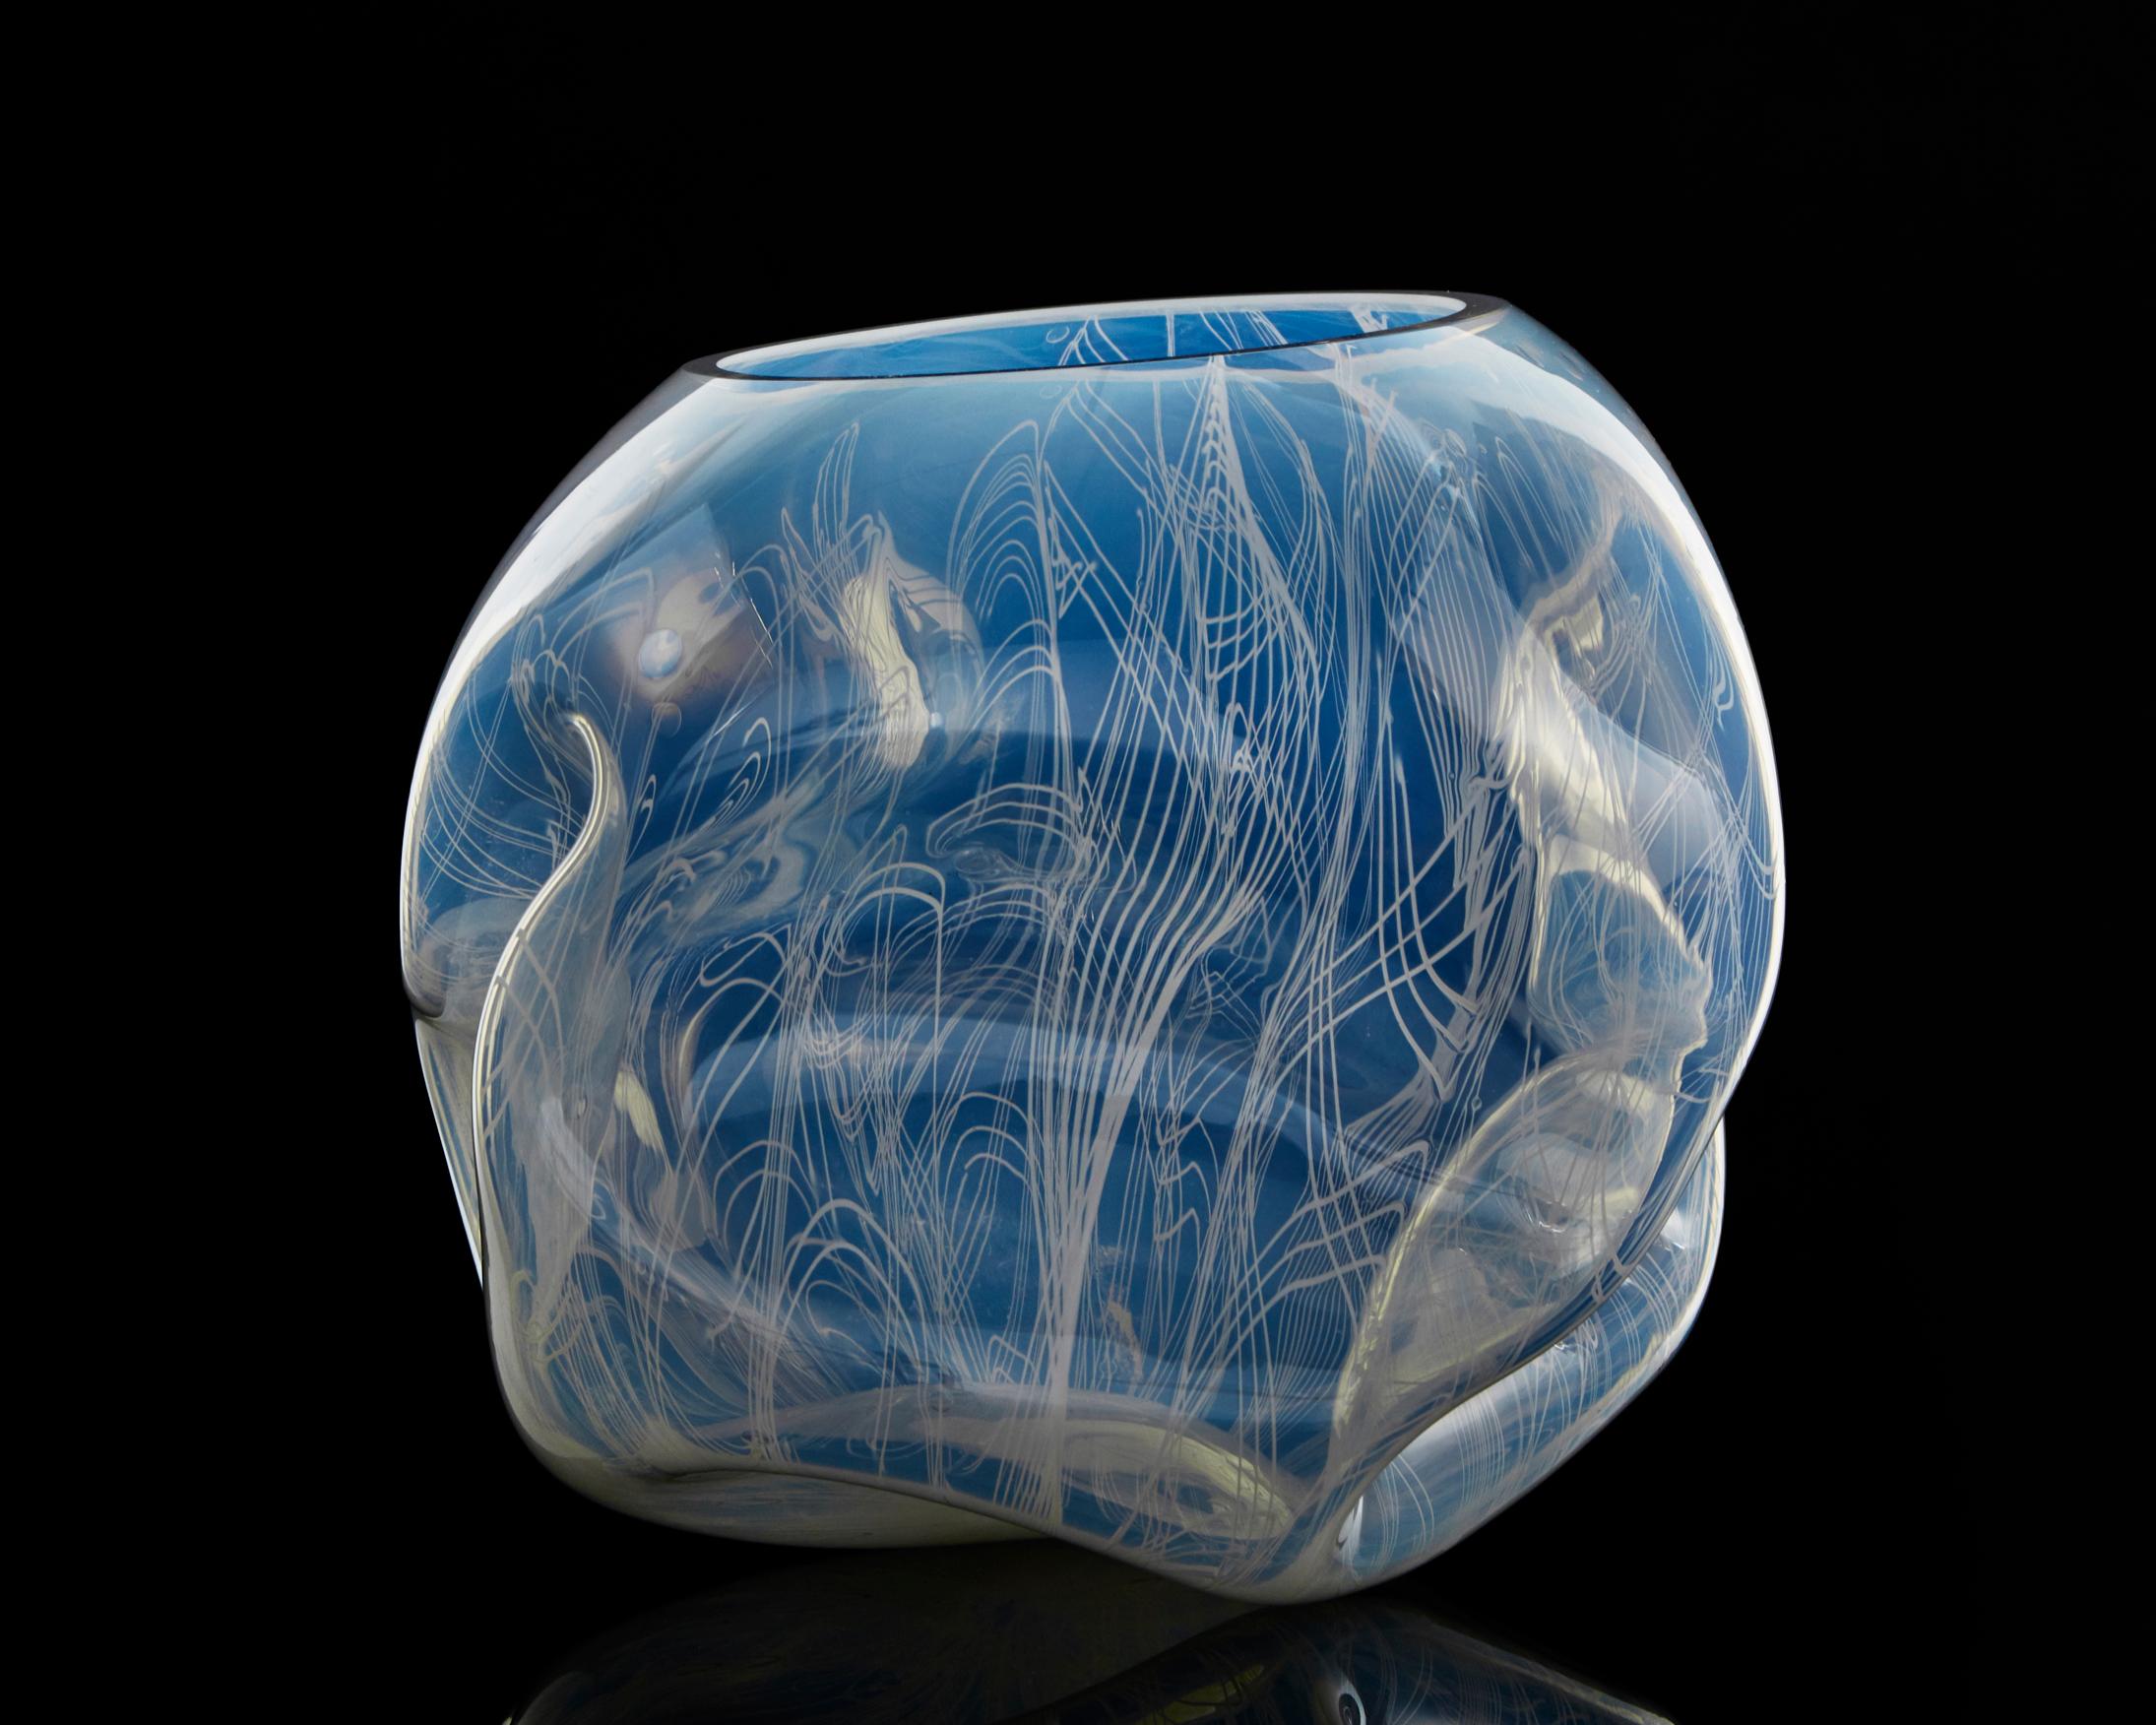 American Unique Crumpled Sculptural Vessel by Jeff Zimmerman and James Mongrain